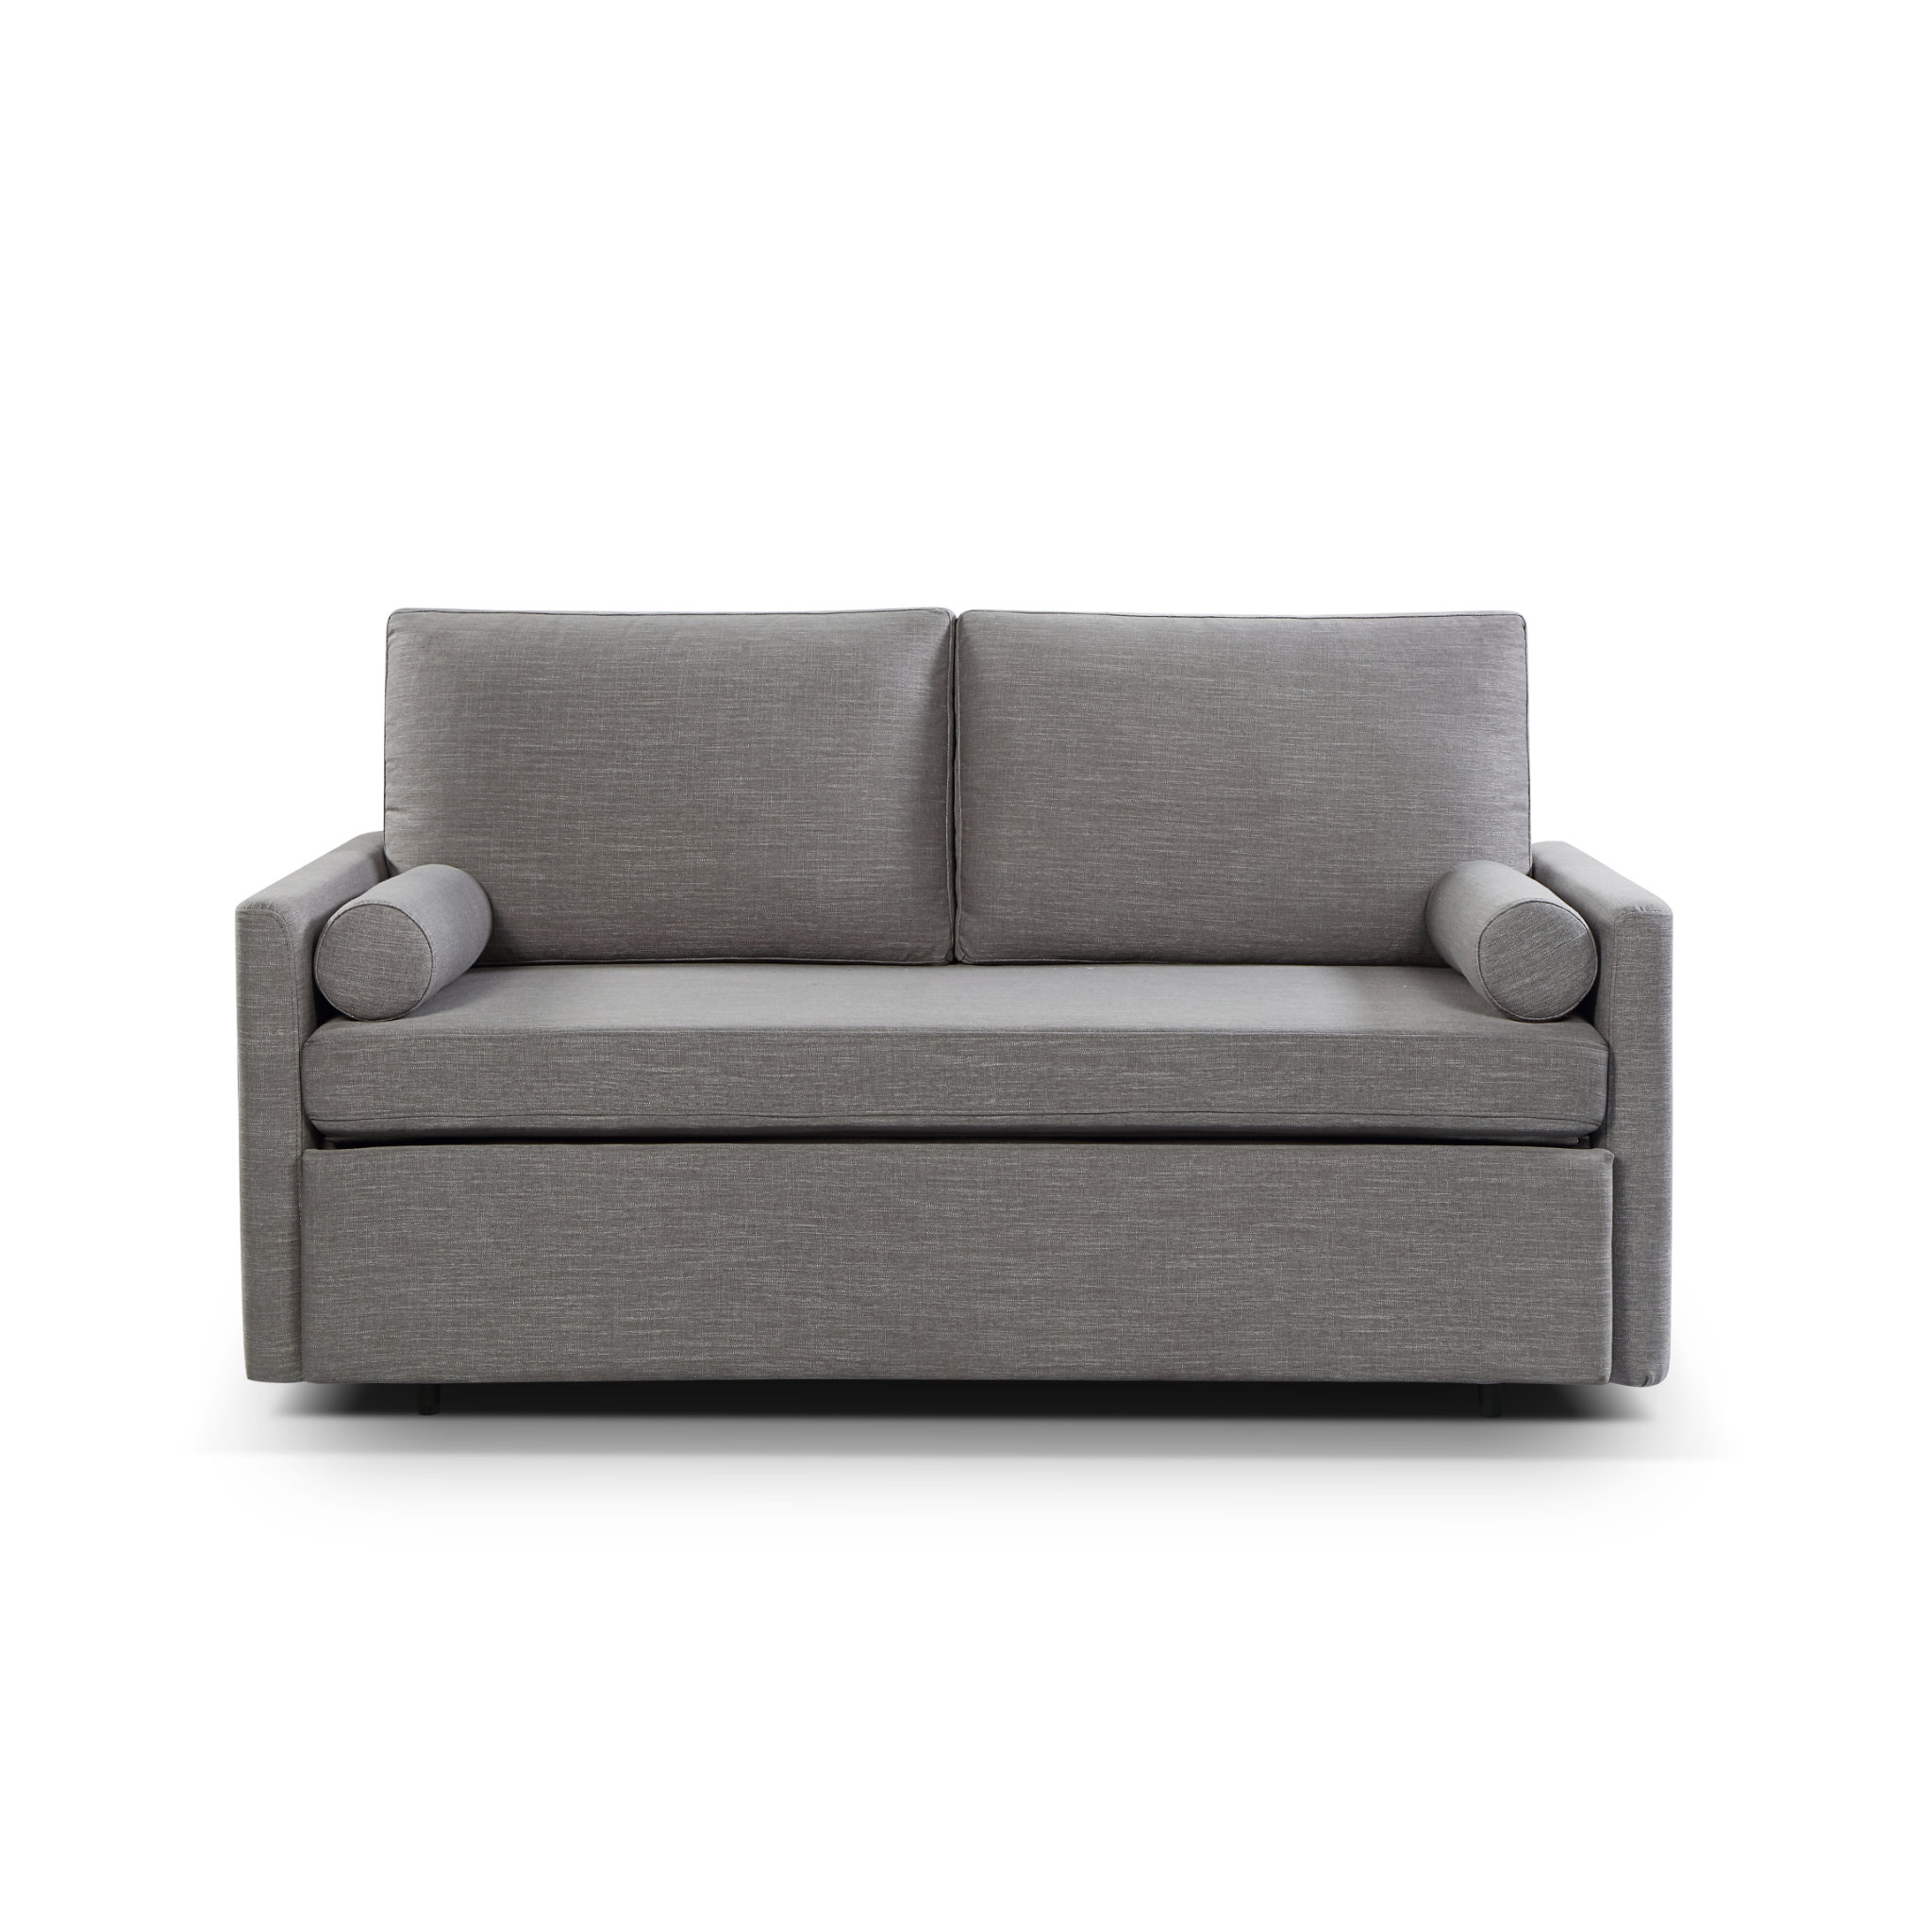 Queen Size Memory Foam Sofa Bed, How Long Is An Apartment Size Sofa Bed